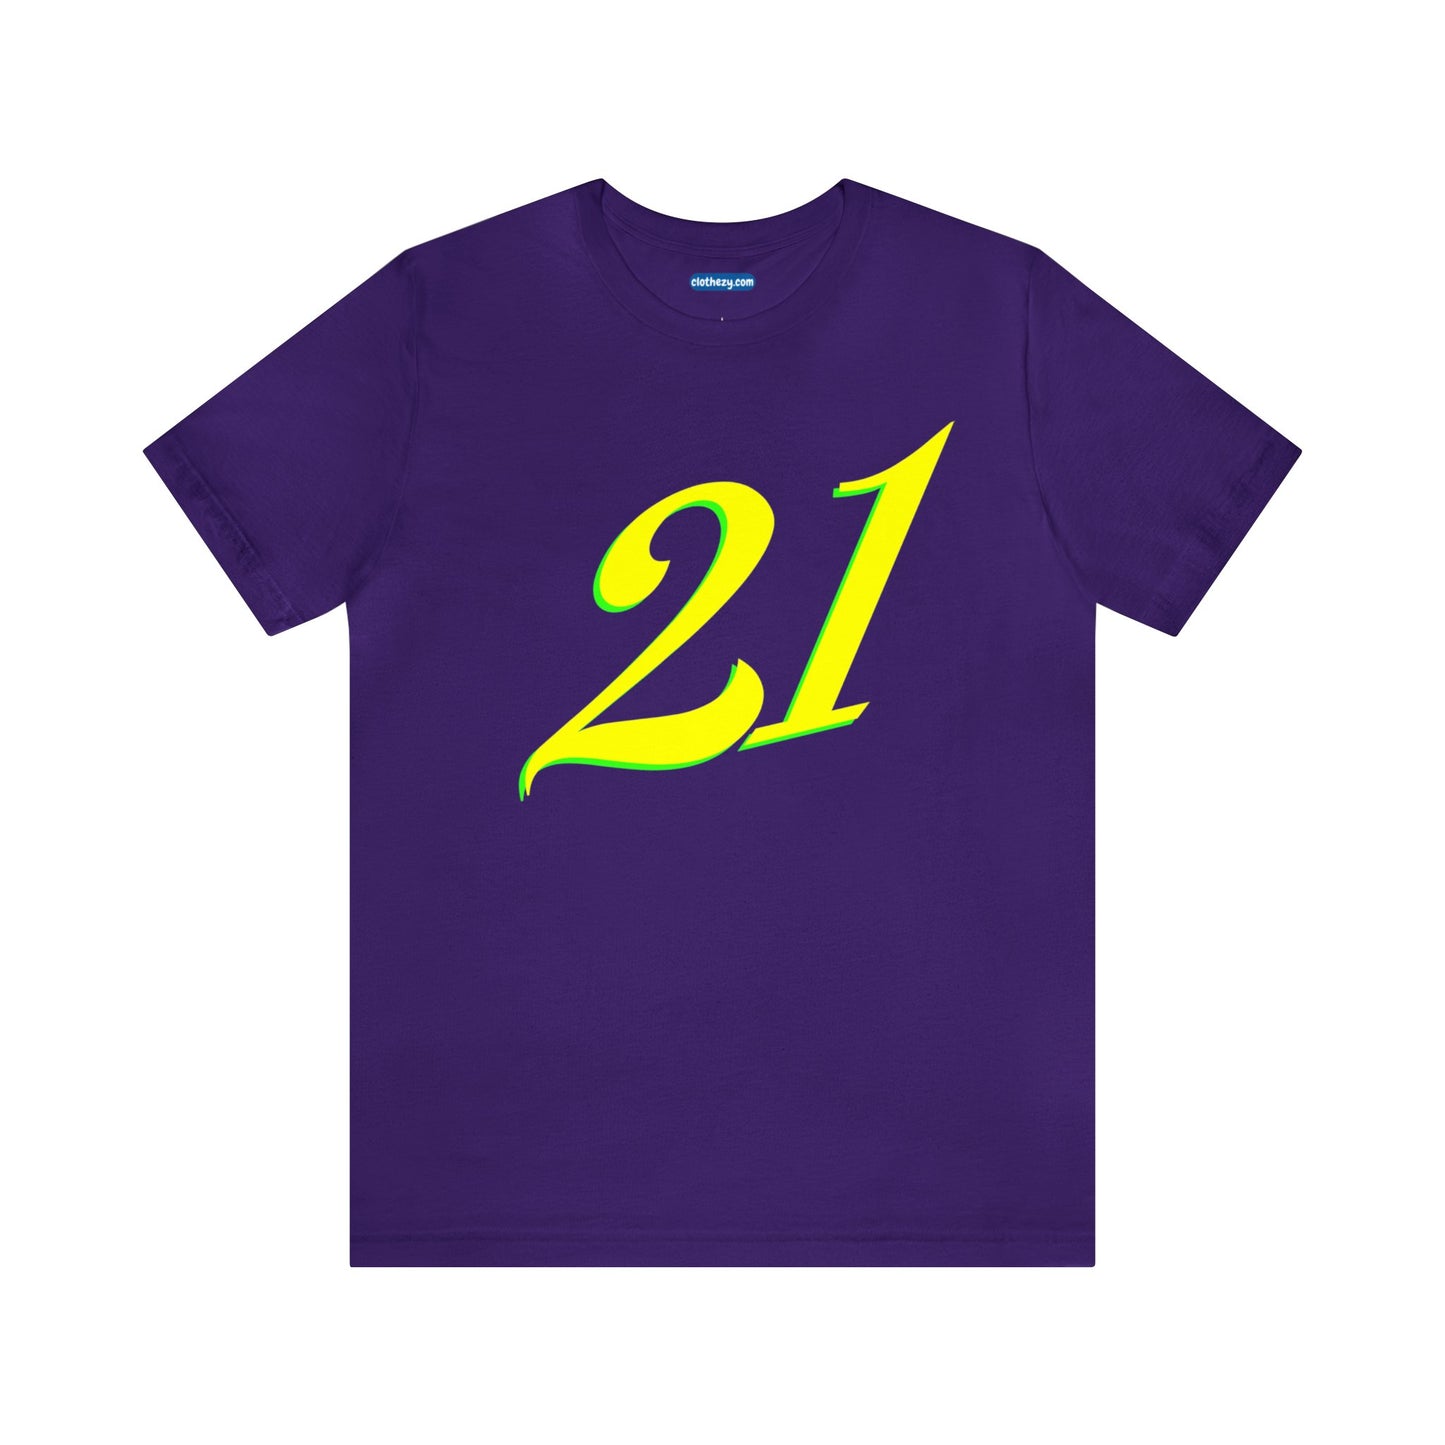 Number 21 Design - Soft Cotton Tee for birthdays and celebrations, Gift for friends and family, Multiple Options by clothezy.com in Purple Size Small - Buy Now